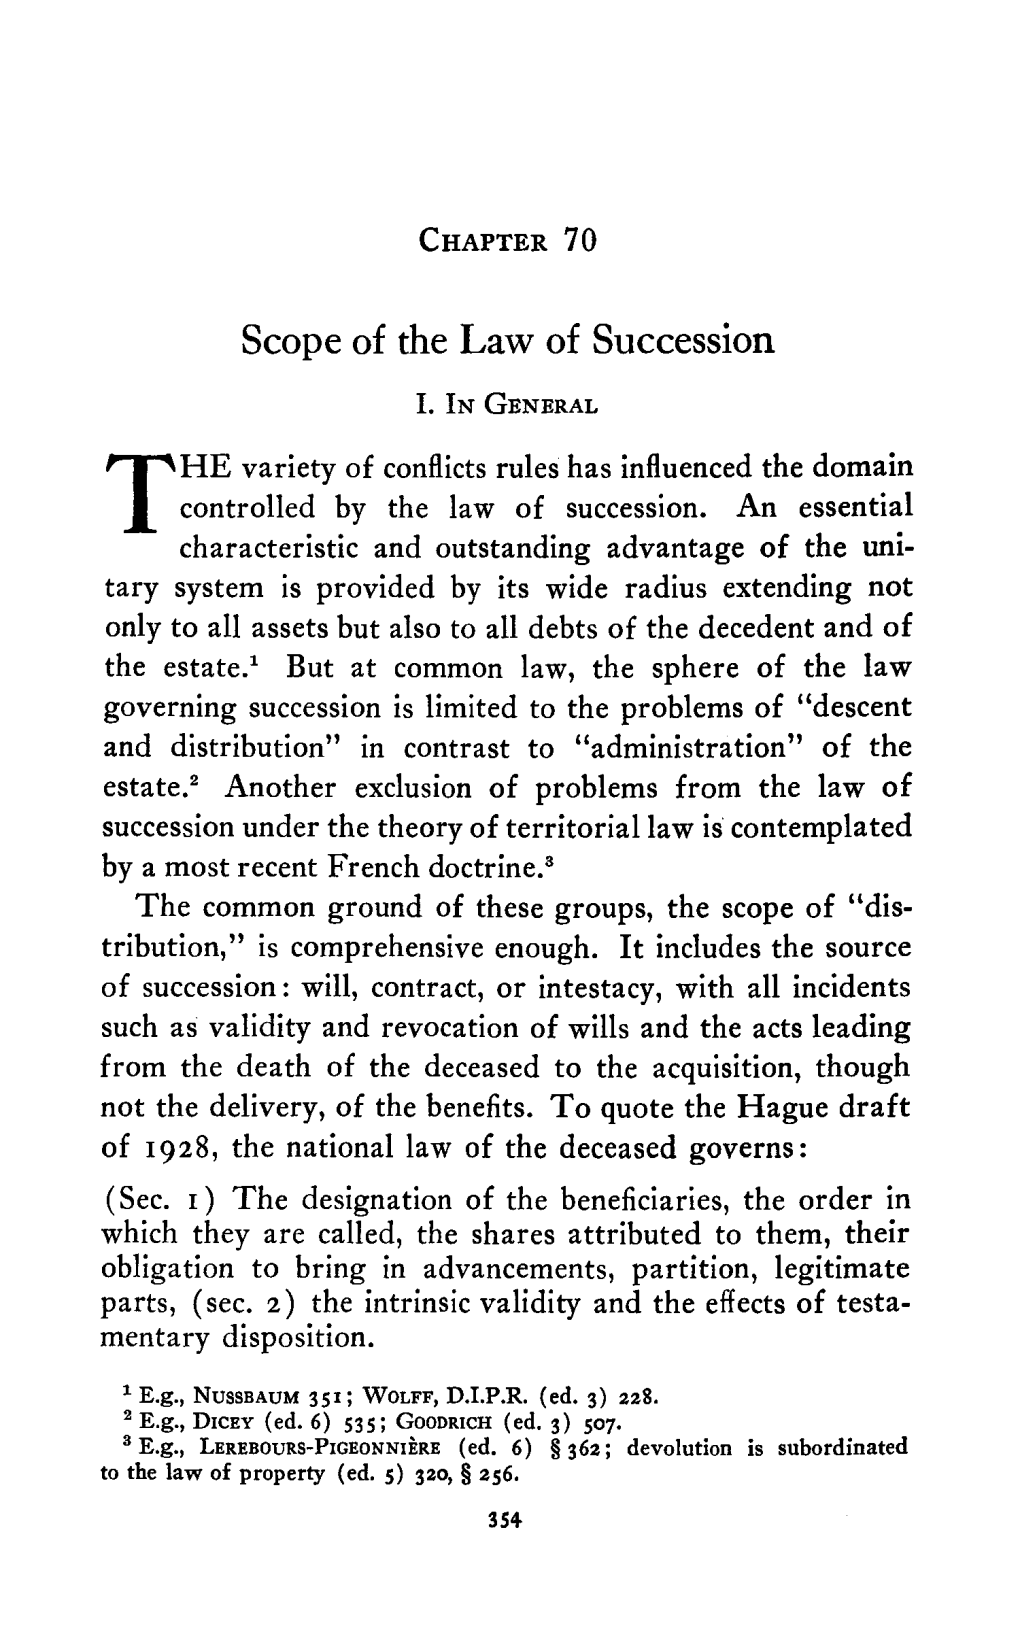 Scope of the Law of Succession